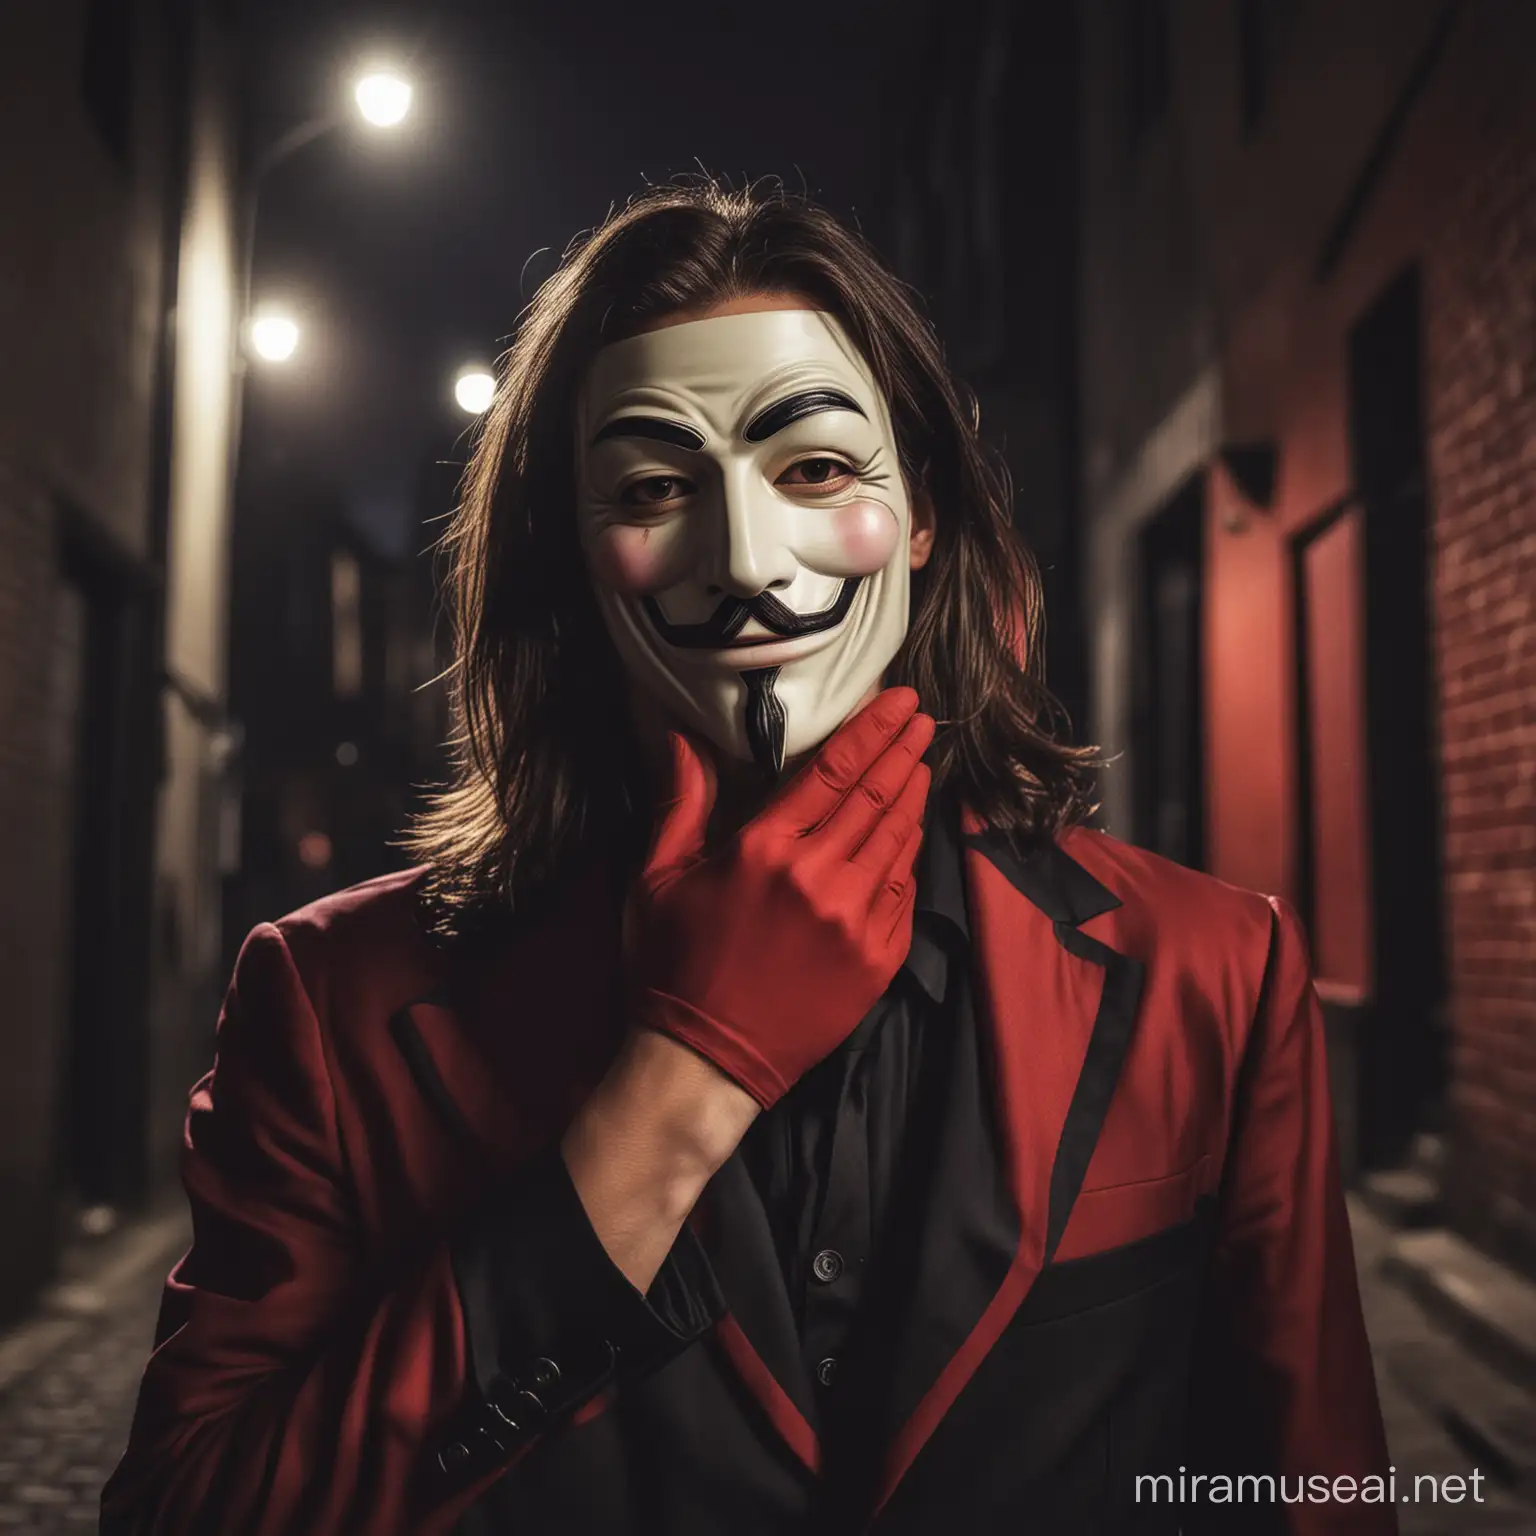 Silent V For Vendetta Inspired Figure in Black and Red Suit on Busy Street